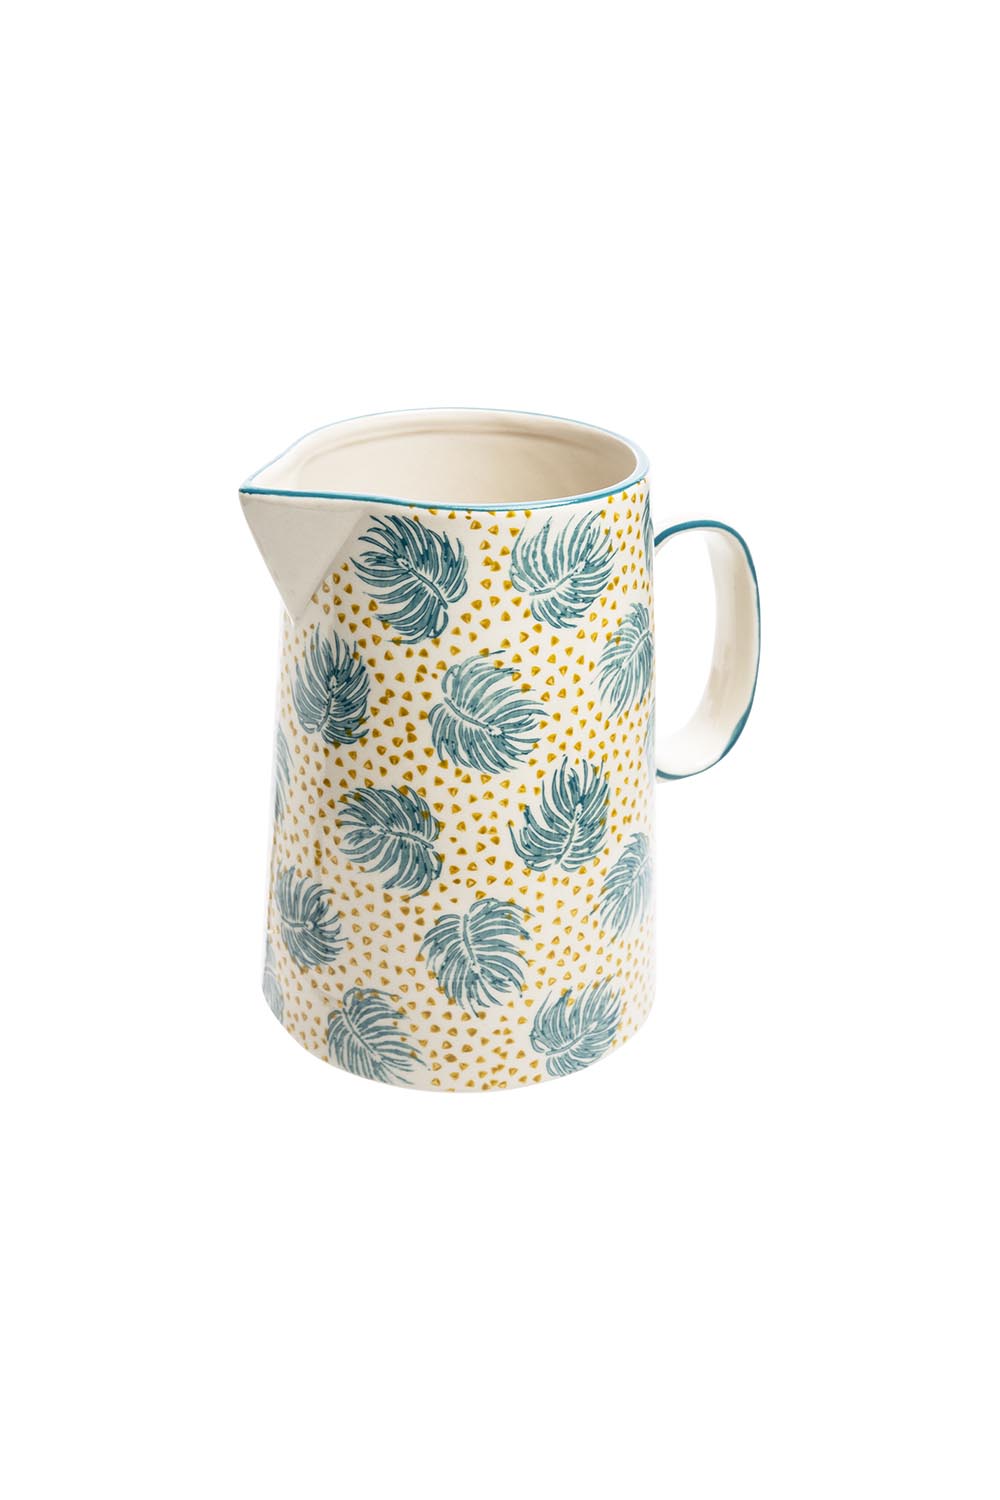 Pitcher in Boho Chic Blue - Small